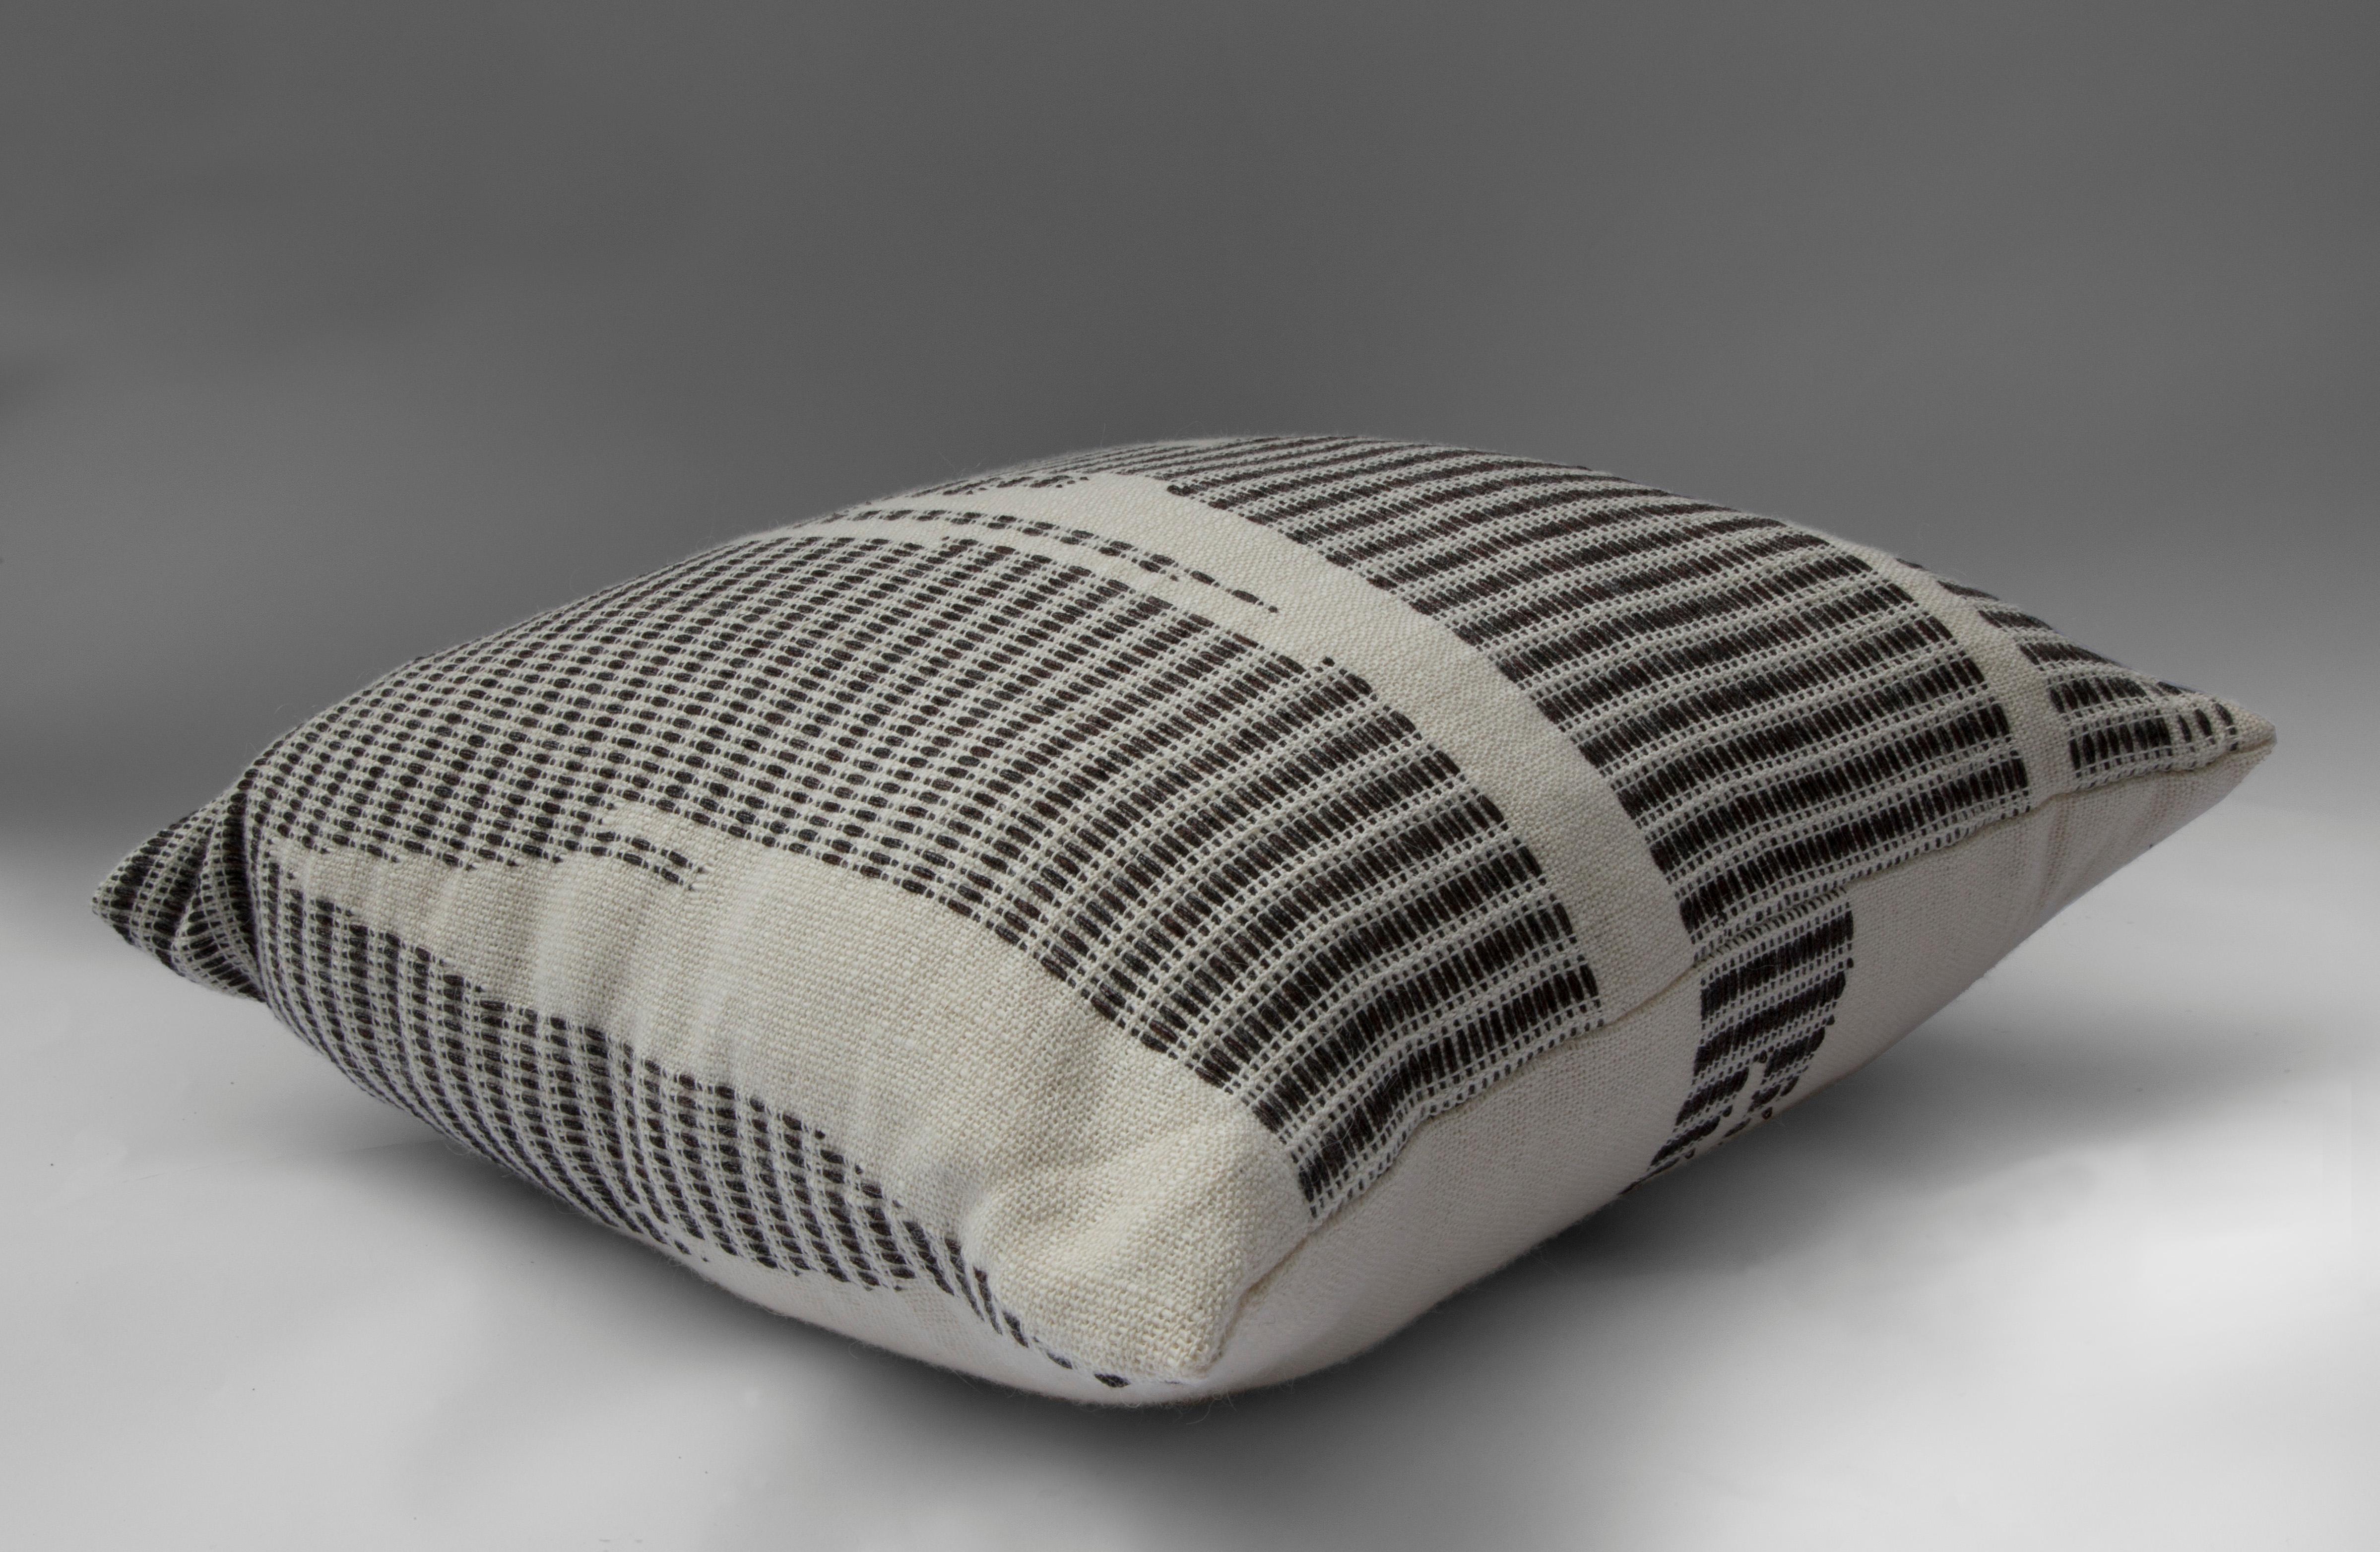 Luxurious pillow, handwoven with Icelandic sheep wool from small farm in Maine as Japanese silk and cotton. Down/feather insert with invisible zipper enclosure.